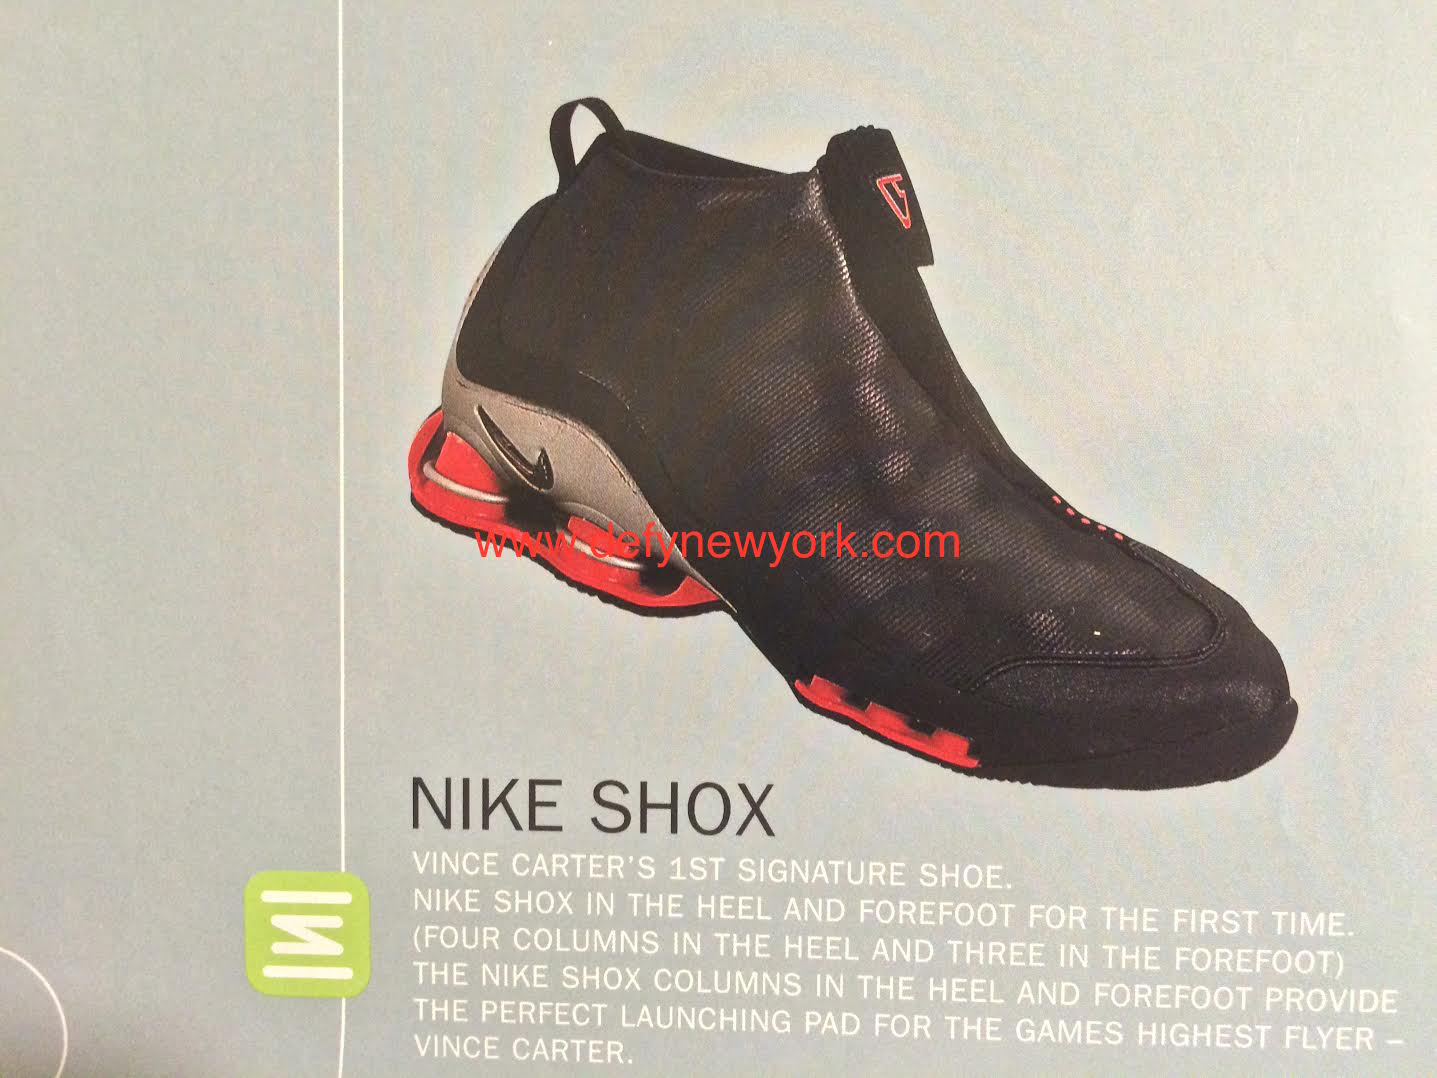 What Pros Wear: Vince Carter's Nike Shox VC 1 Shoes - What Pros Wear